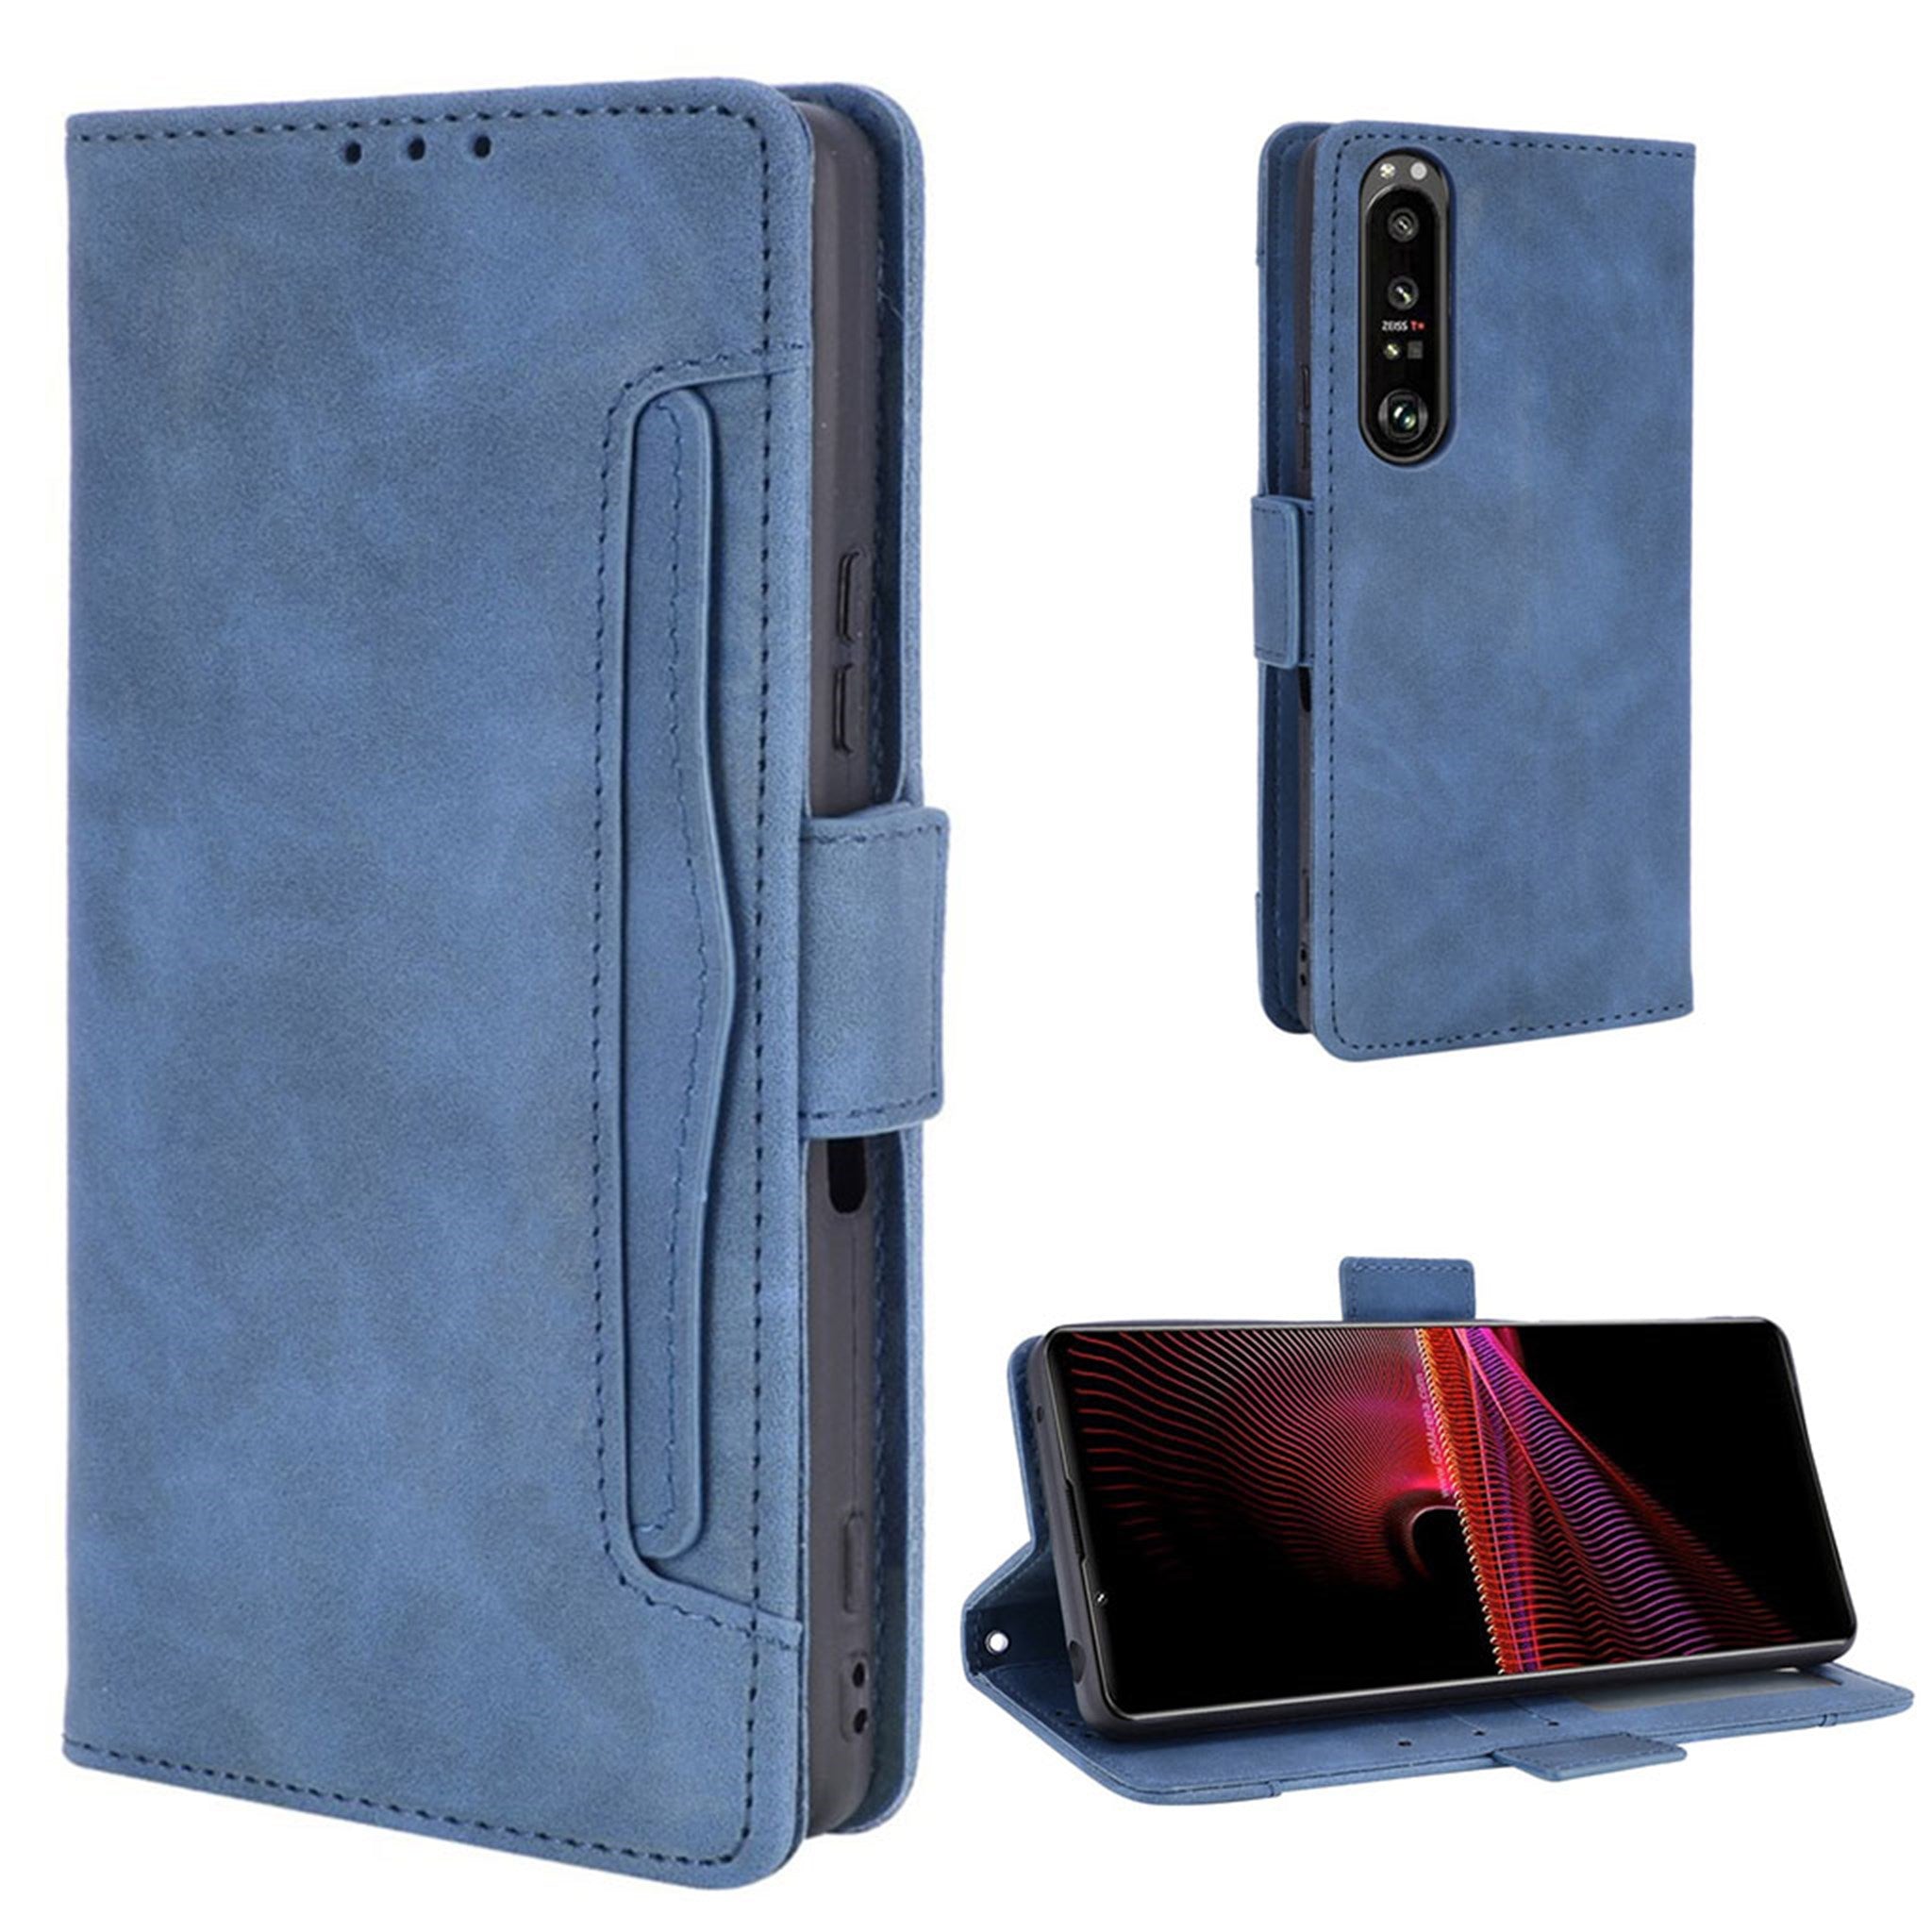 Modern-styled leather wallet case for Sony Xperia 1 III - Blue